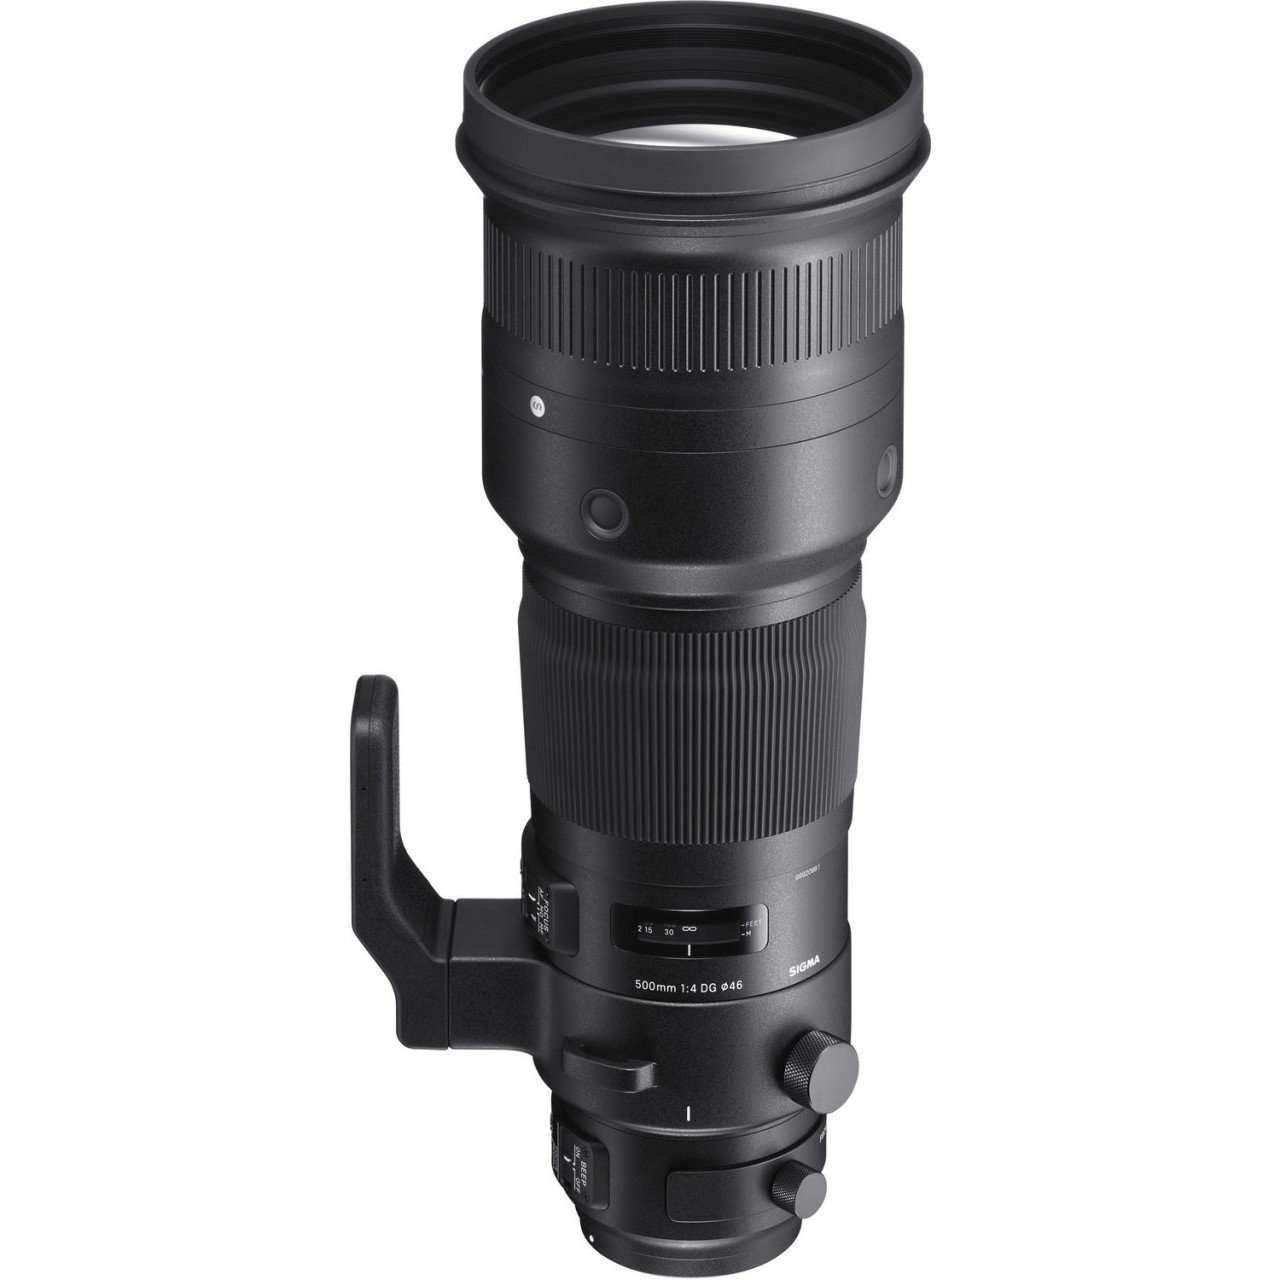 Sigma 500mm f/4 DG OS HSM Sports Lens for Canon EF Sigma Lens - DSLR Fixed Focal Length